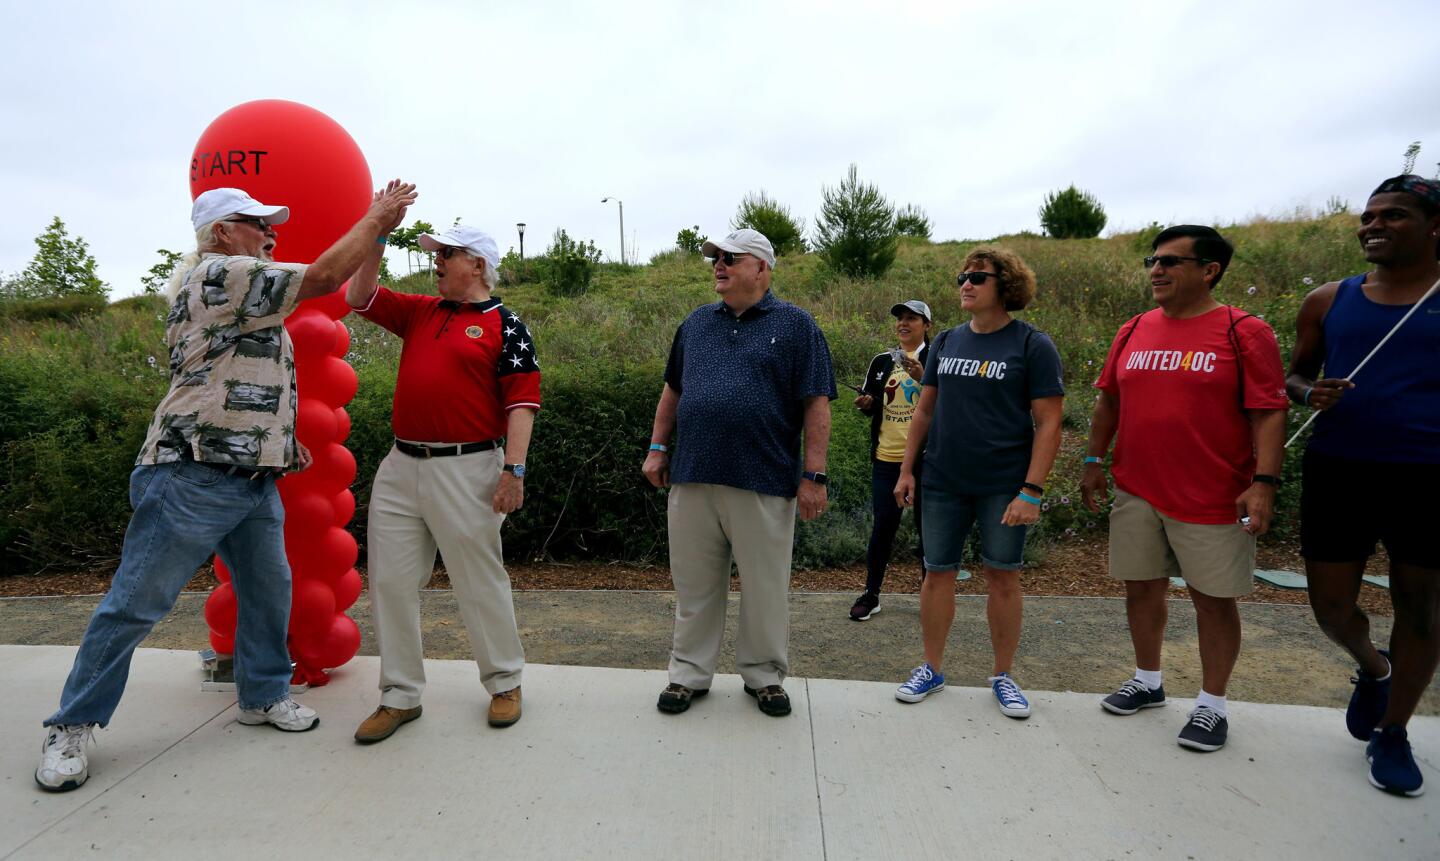 Retired member of the United States Marine Corps Bill Cook, of Mission Viejo, gives the first high-five to U.S. Army Vietnam veteran Robert Brower, of Irvine, to start a high-five chain to celebrate the grand opening of the Great Park Trails in Irvine on June 15, 2019. U.S. Army veteran John Rowe of Tustin stands to the right of Brower.